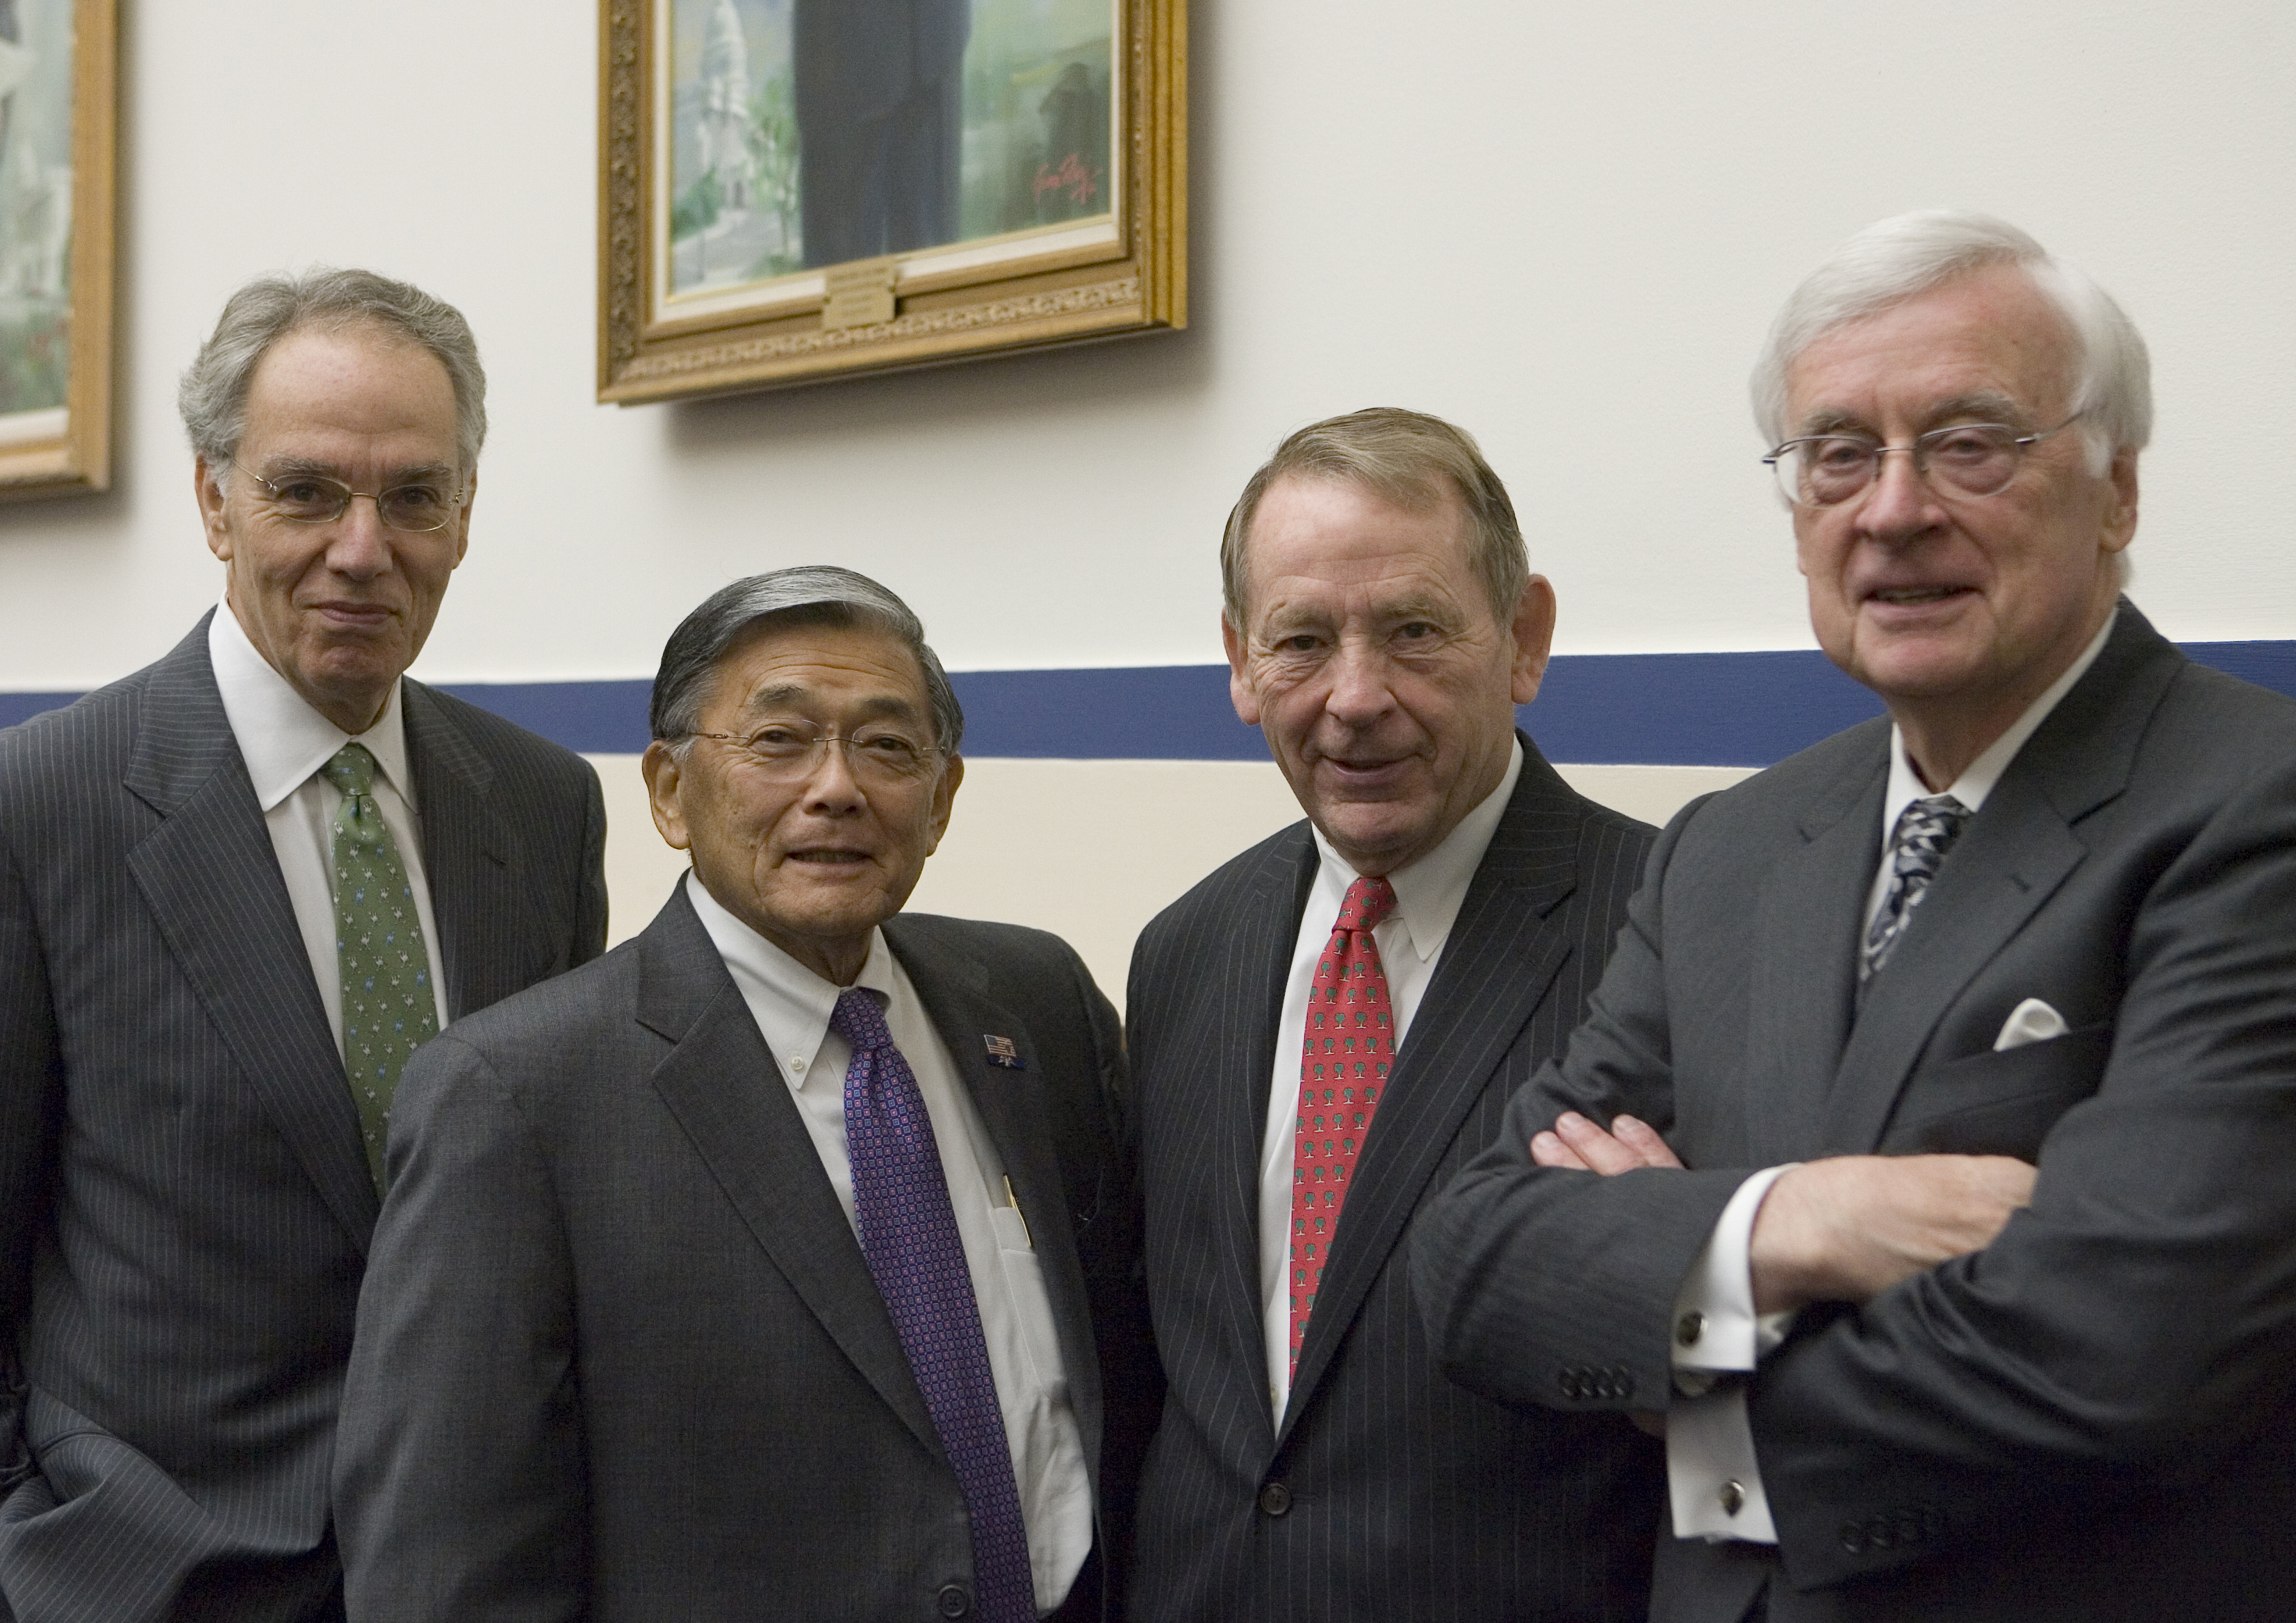 Group photo left to right: Jeffrey Shane, Norman Mineta, Samuel Skinner, and  Gerald L. Baliles